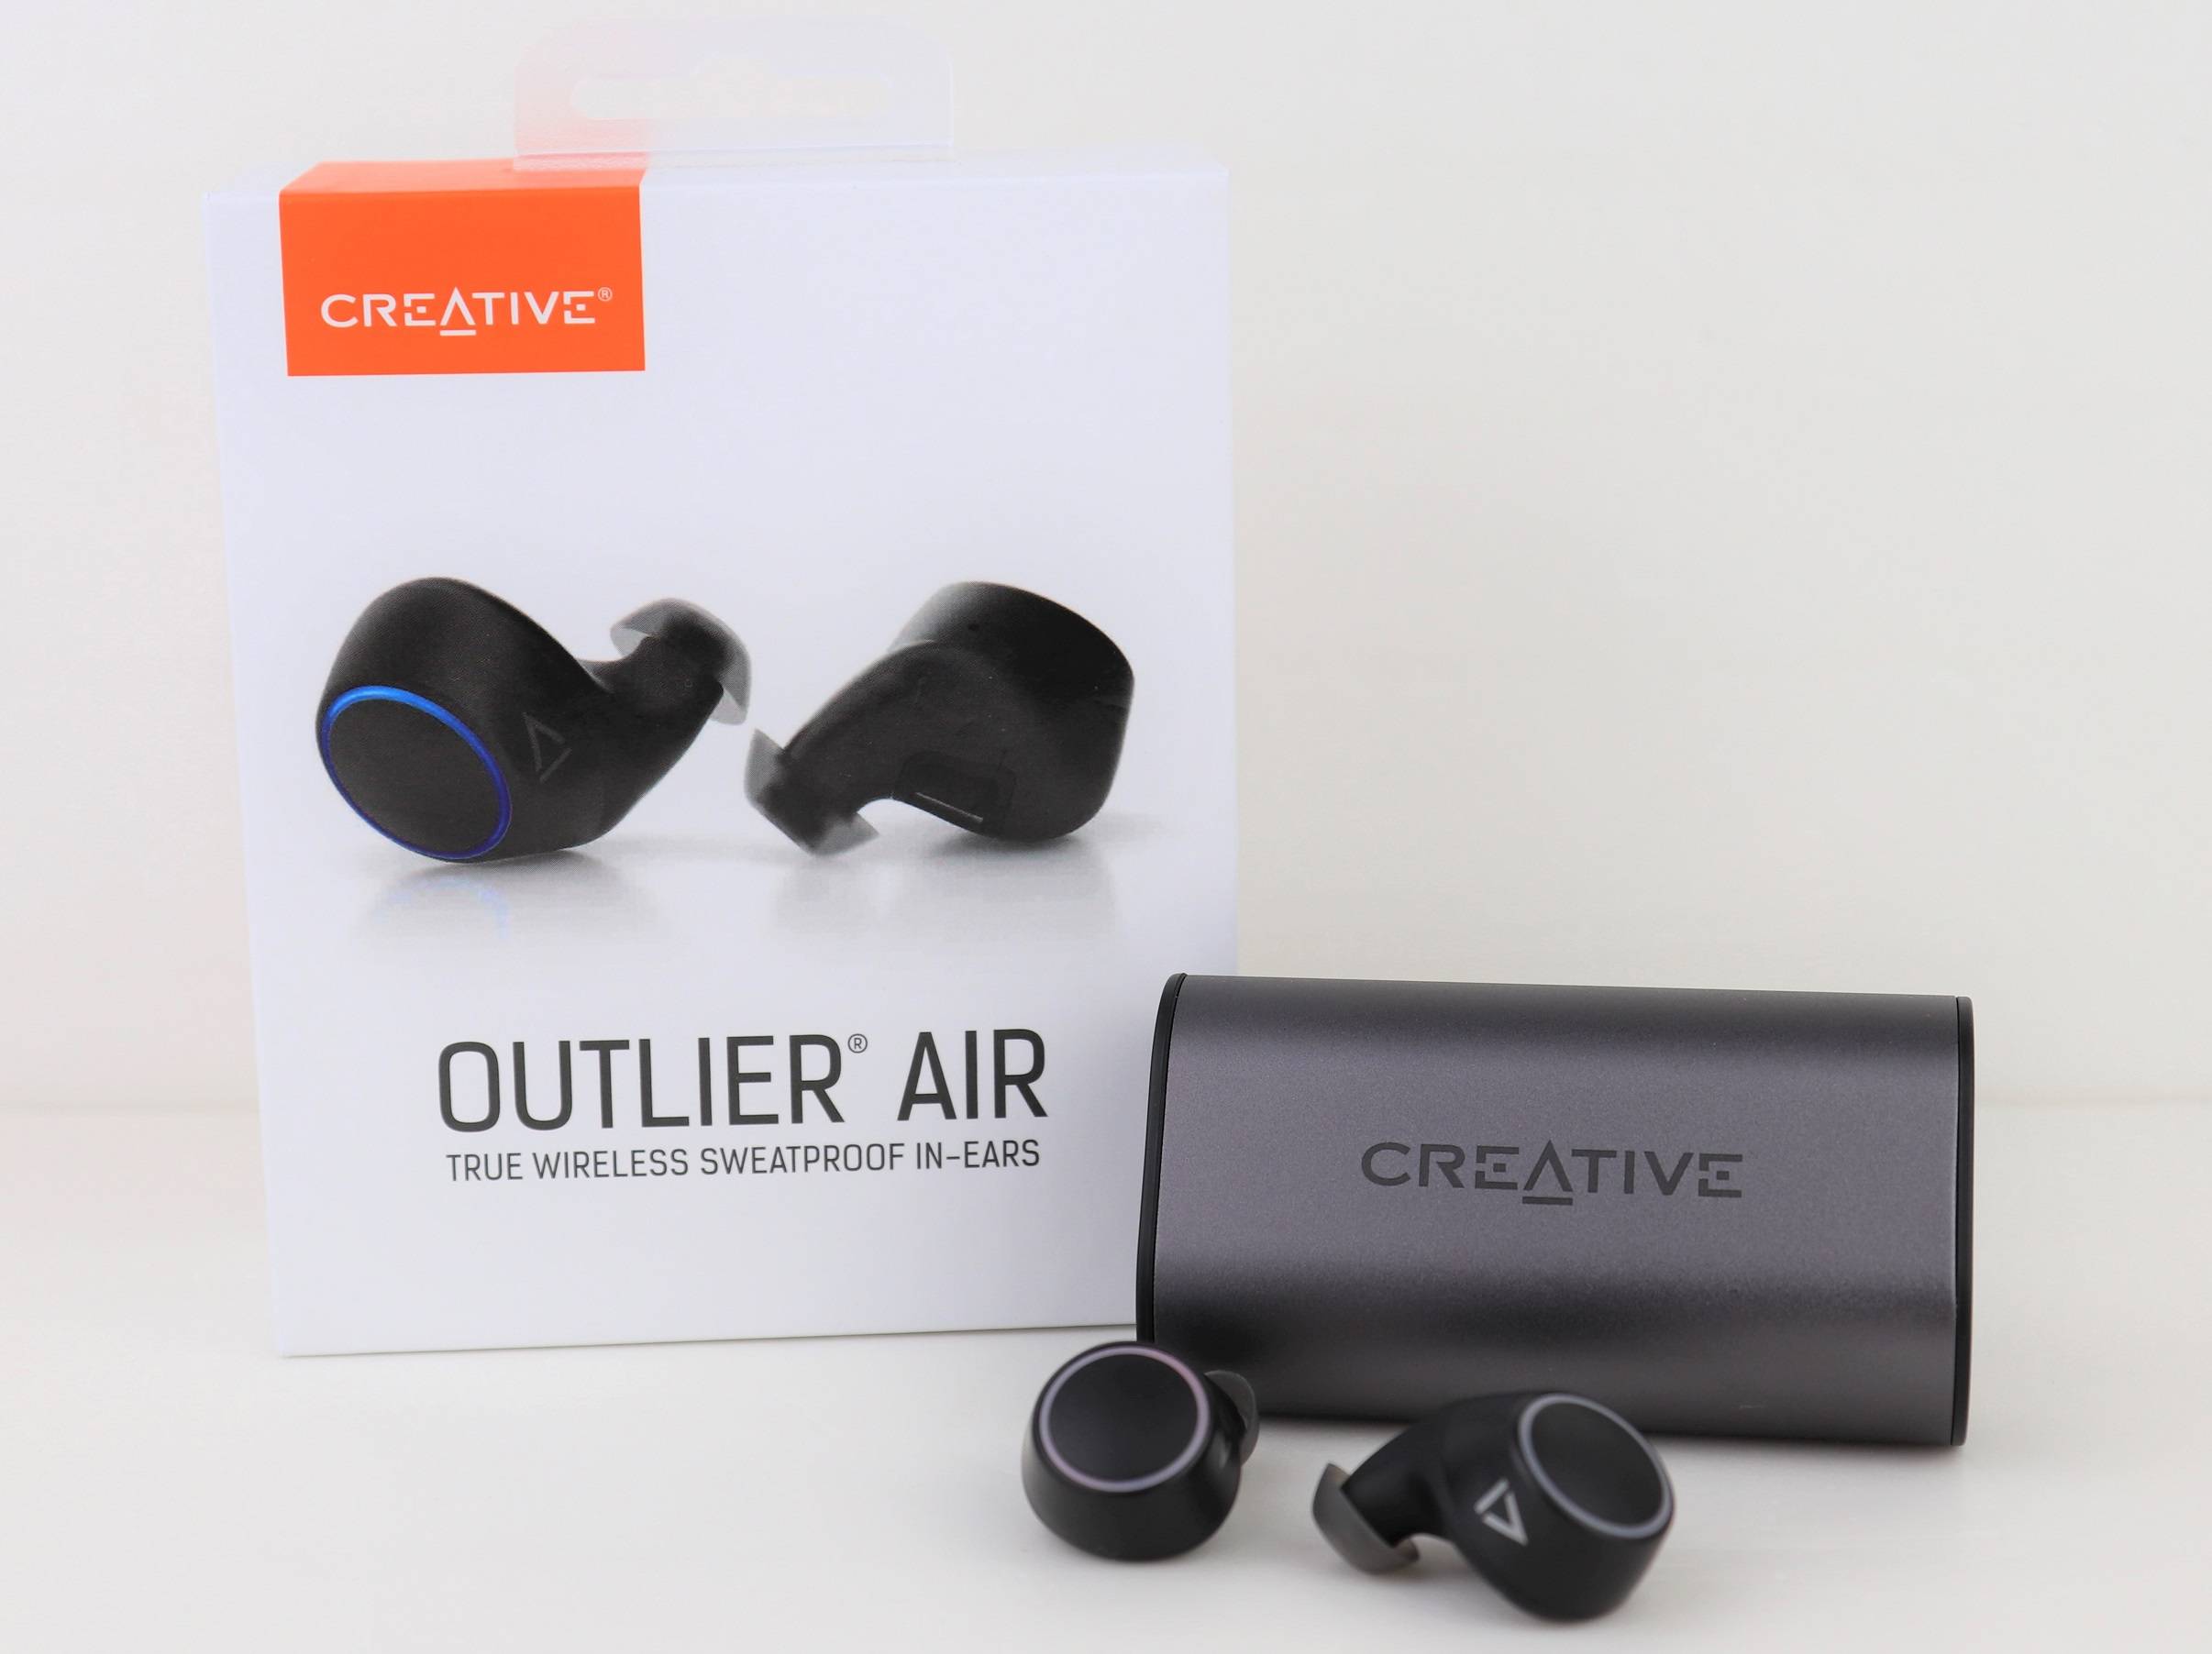 Creative Outlier Air Truly Wireless Earphones